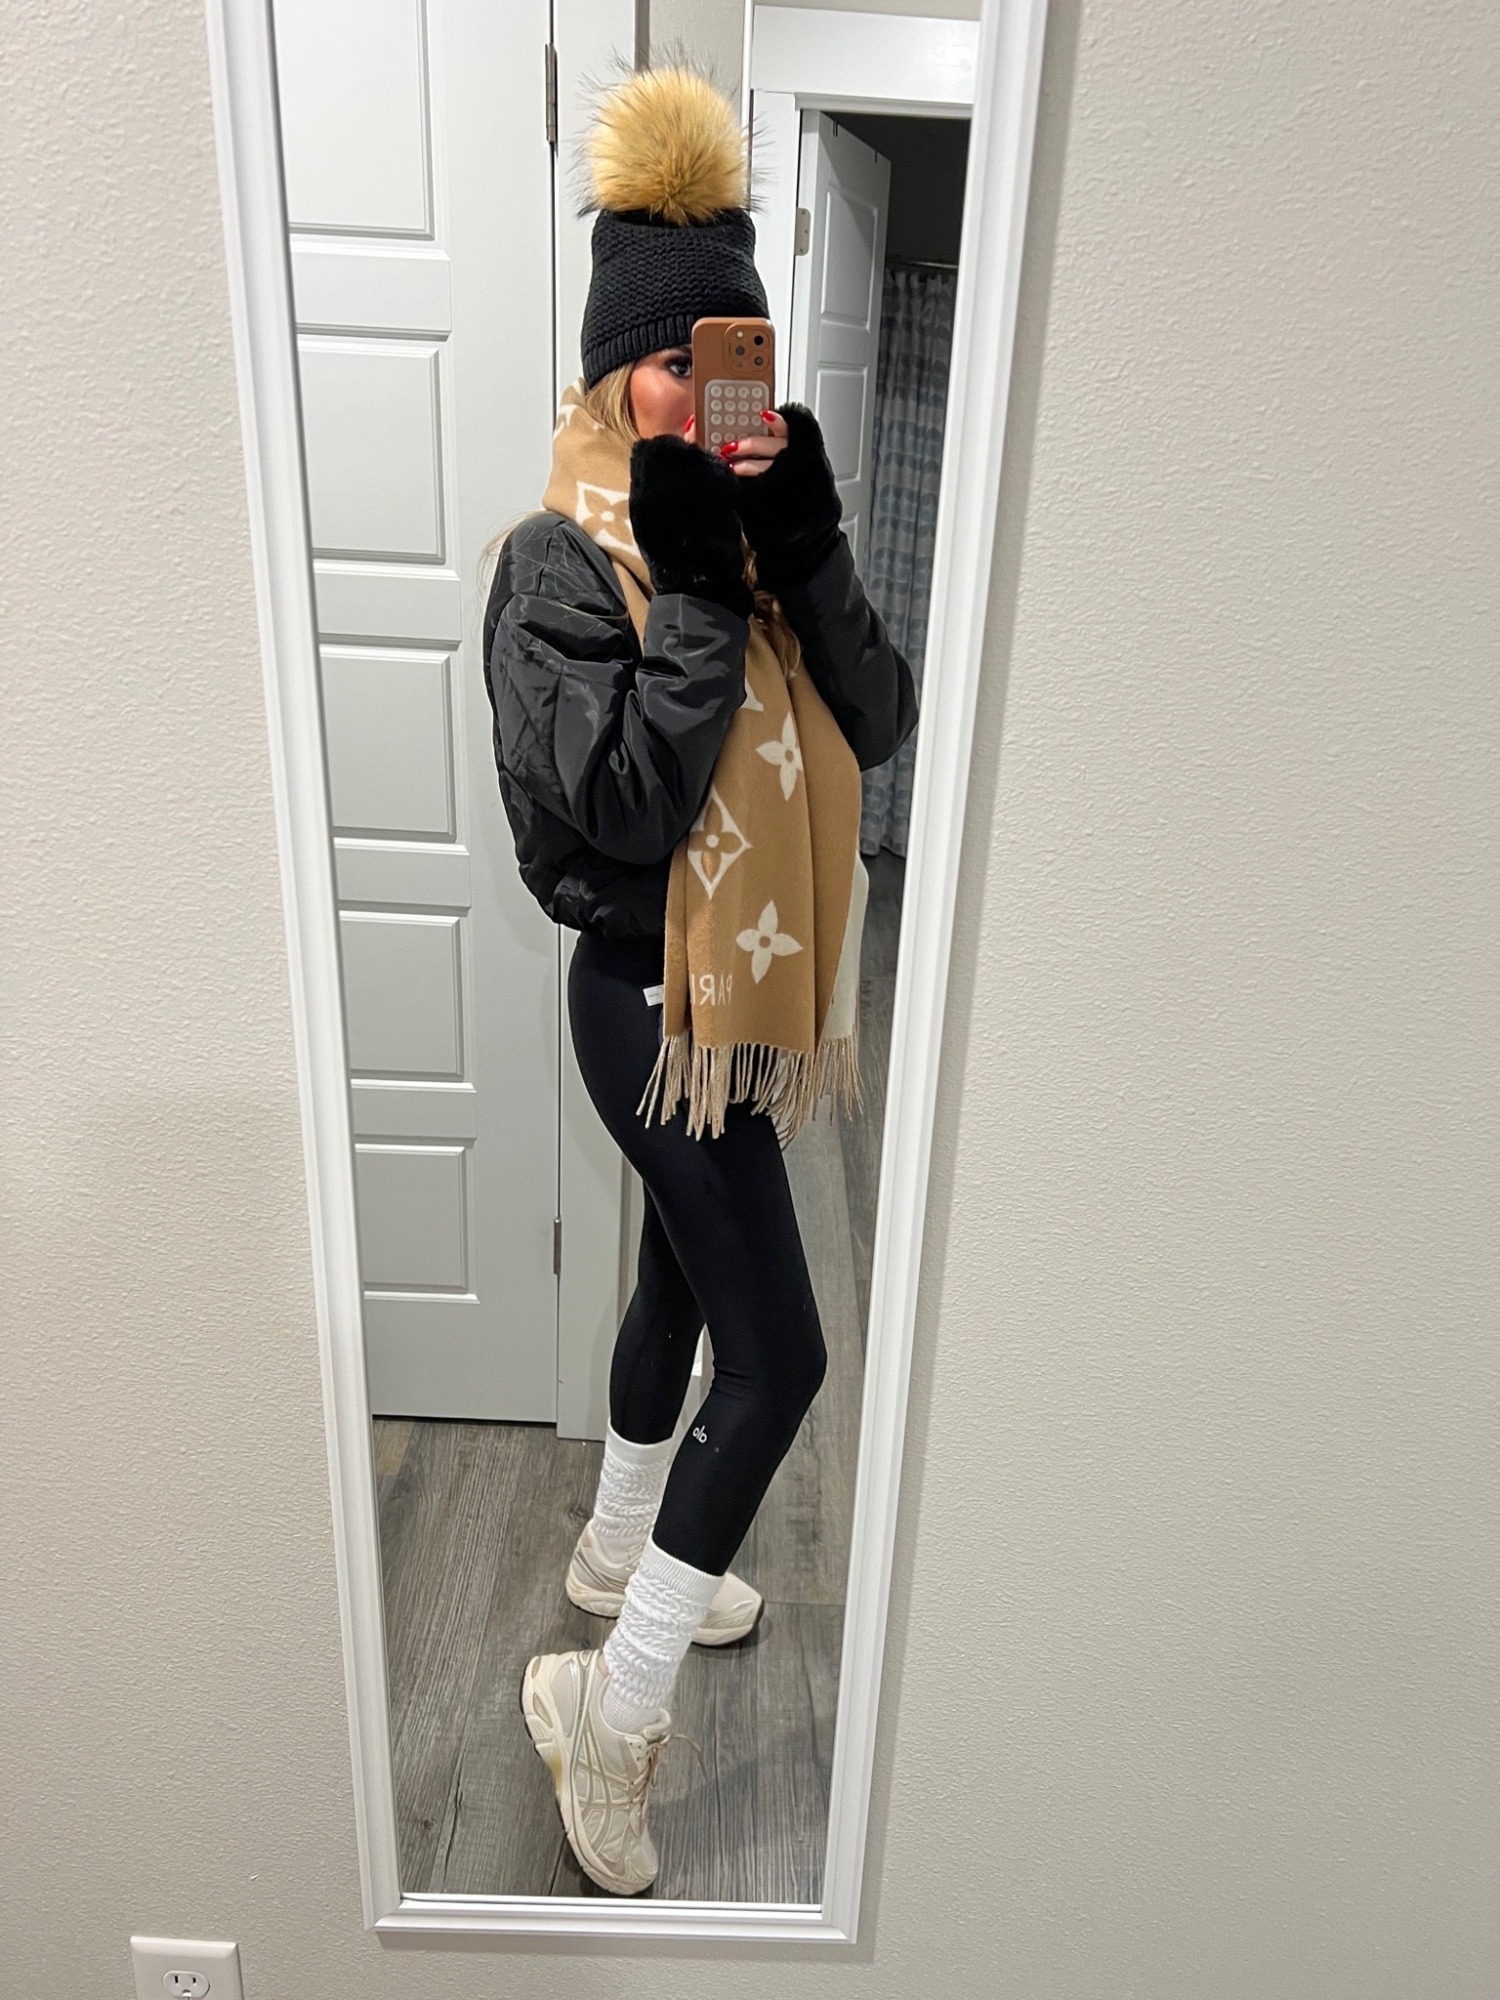 How to style scrunch socks and sneakers, louis vuitton LV scarf, Emily Gemma Winter Outfit Inspiration